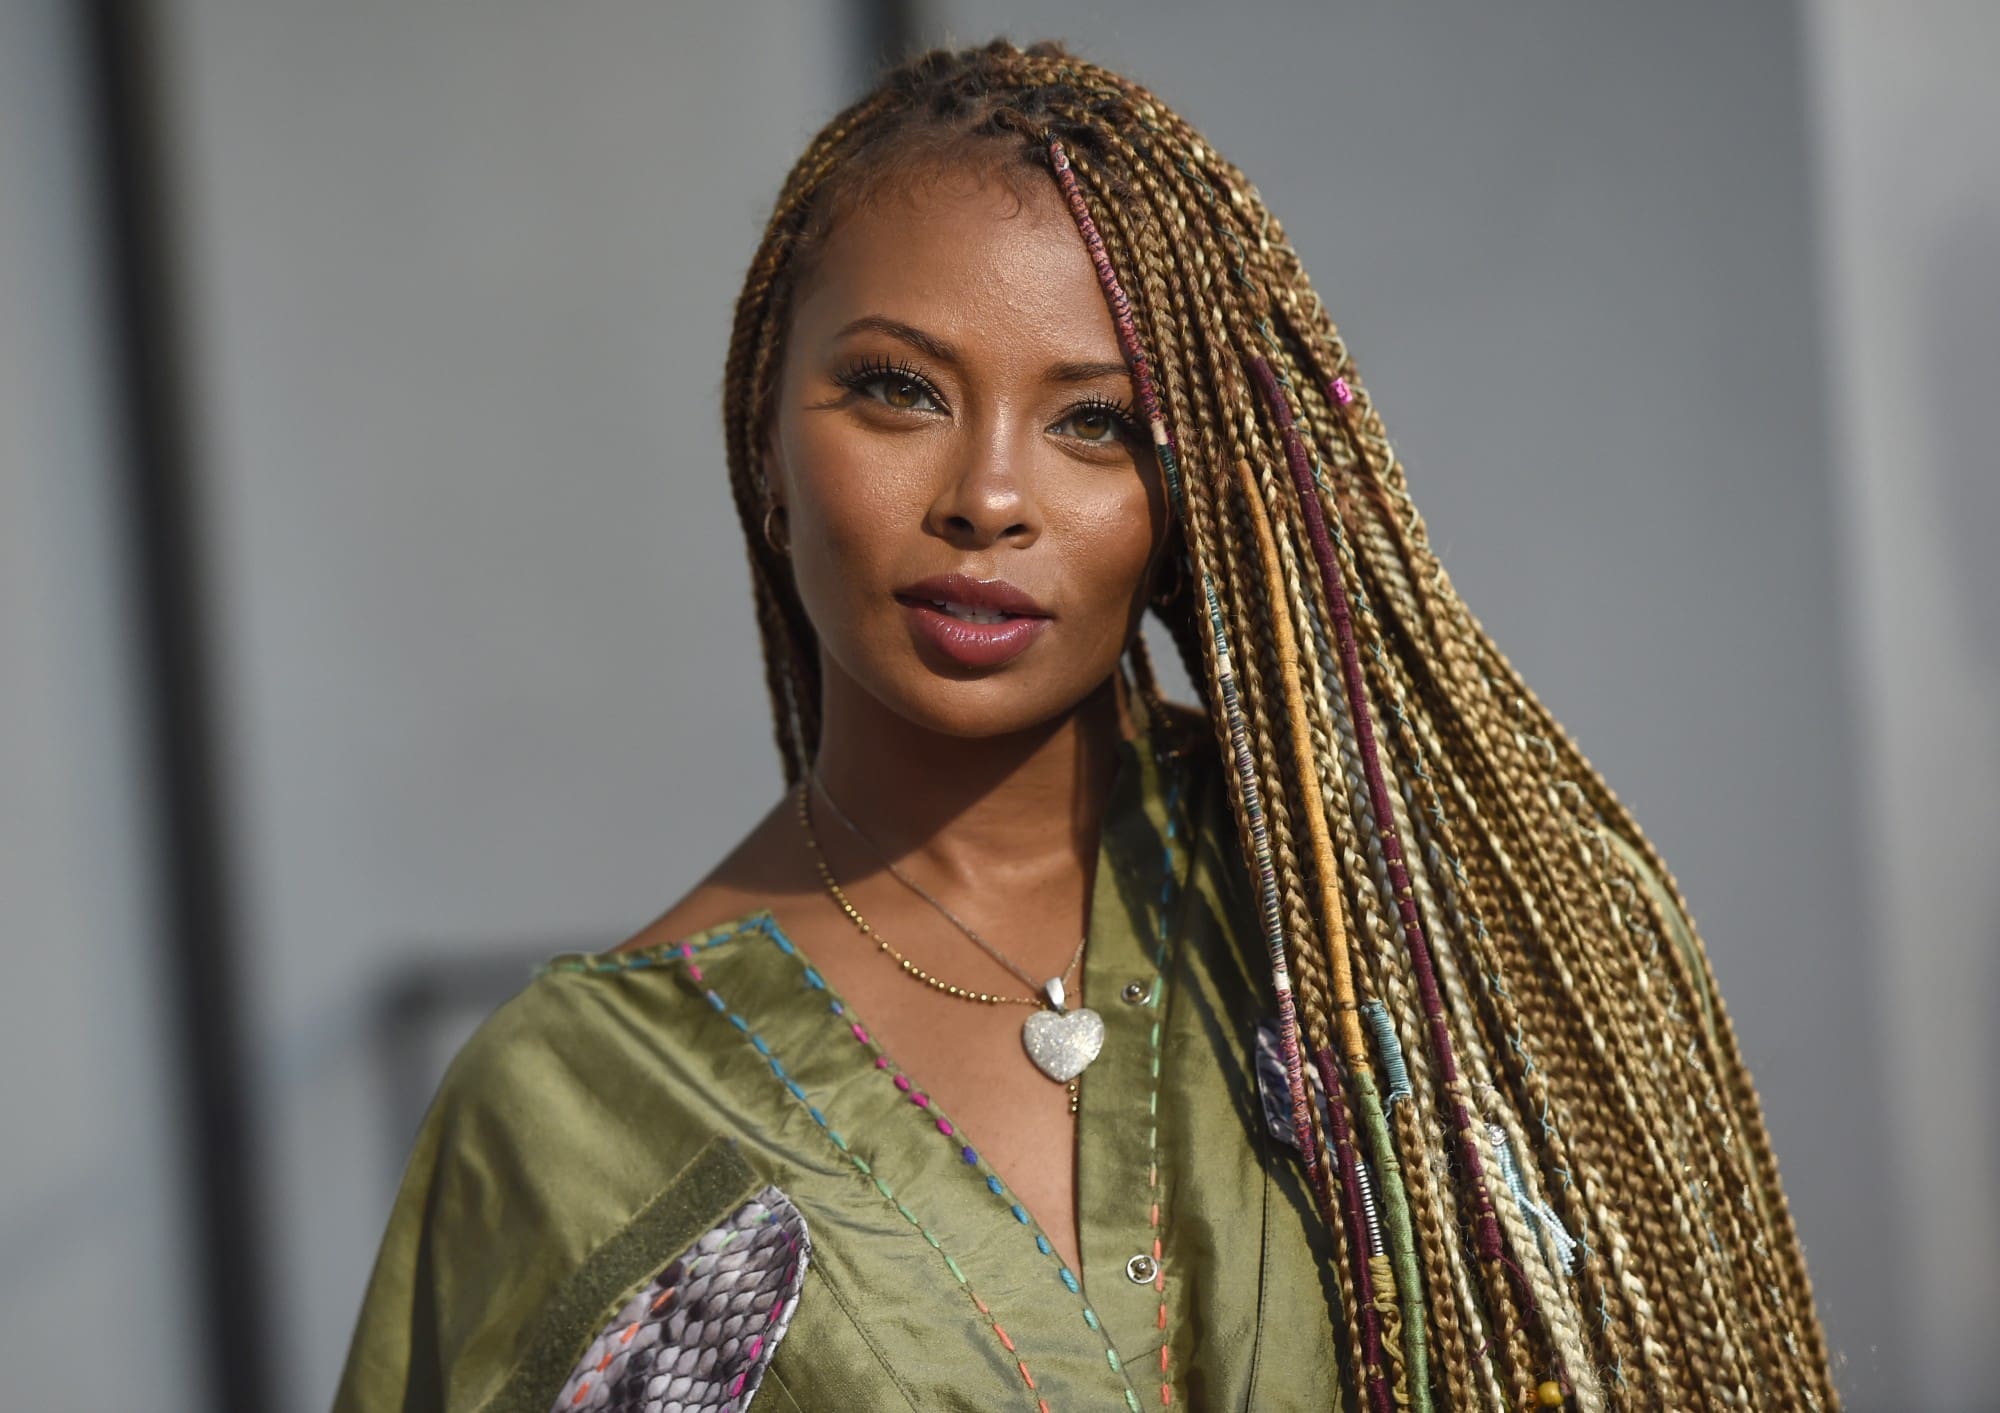 Eva Marcille Celebrates The Birthday Of Her BFF - Check Out The Photos She Shared